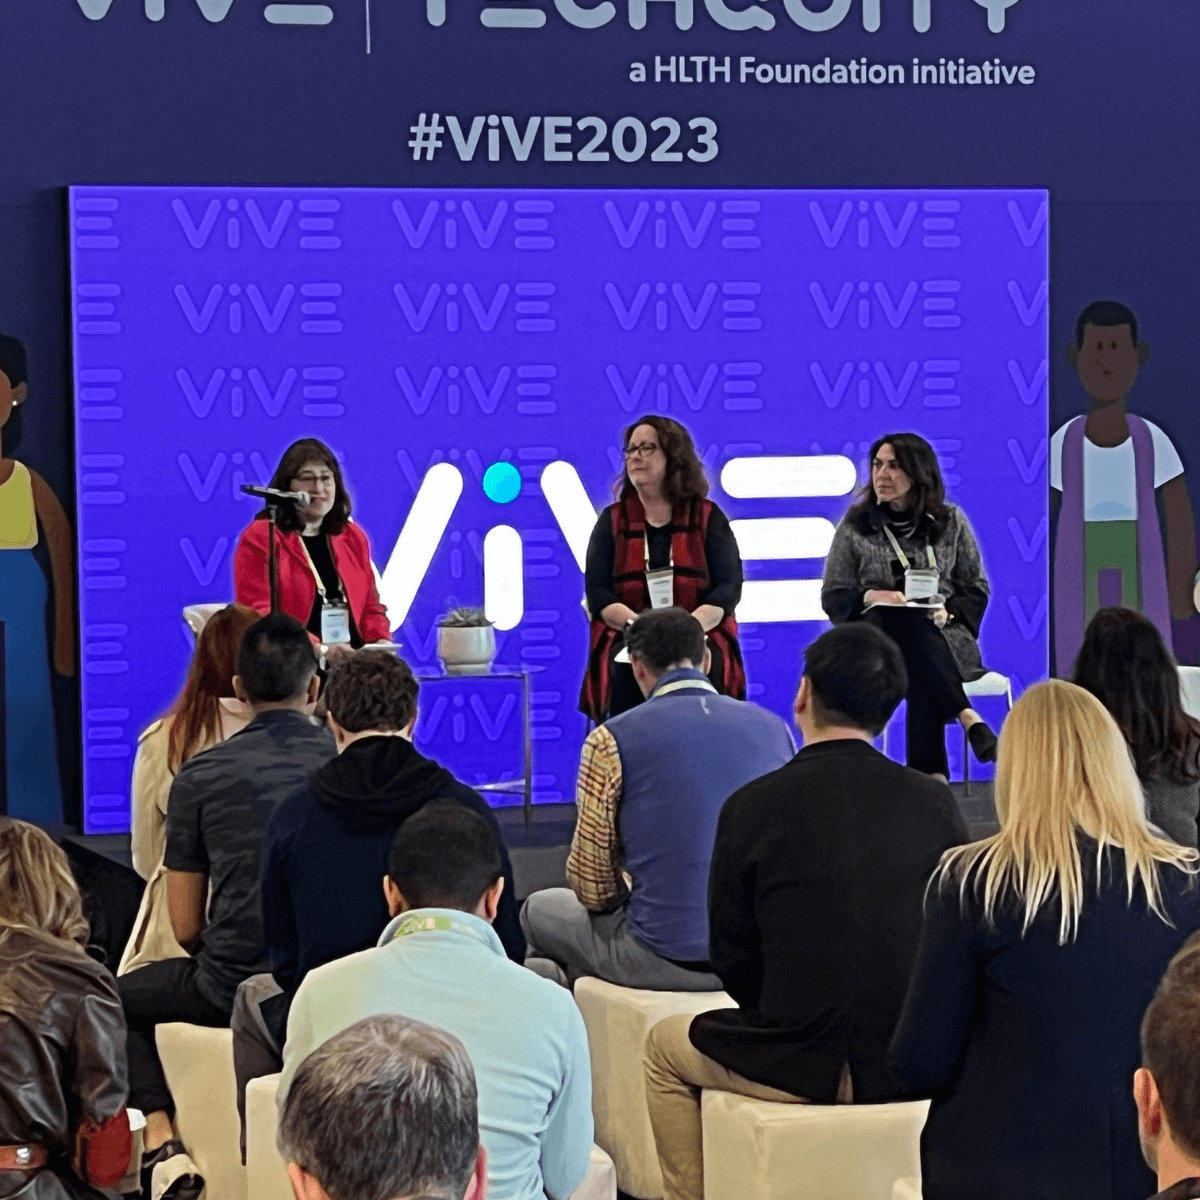 Malekeh Amini and Laurel Williams speak during Techquity programming at the ViVE 2023 conference in Nashville, March 2023